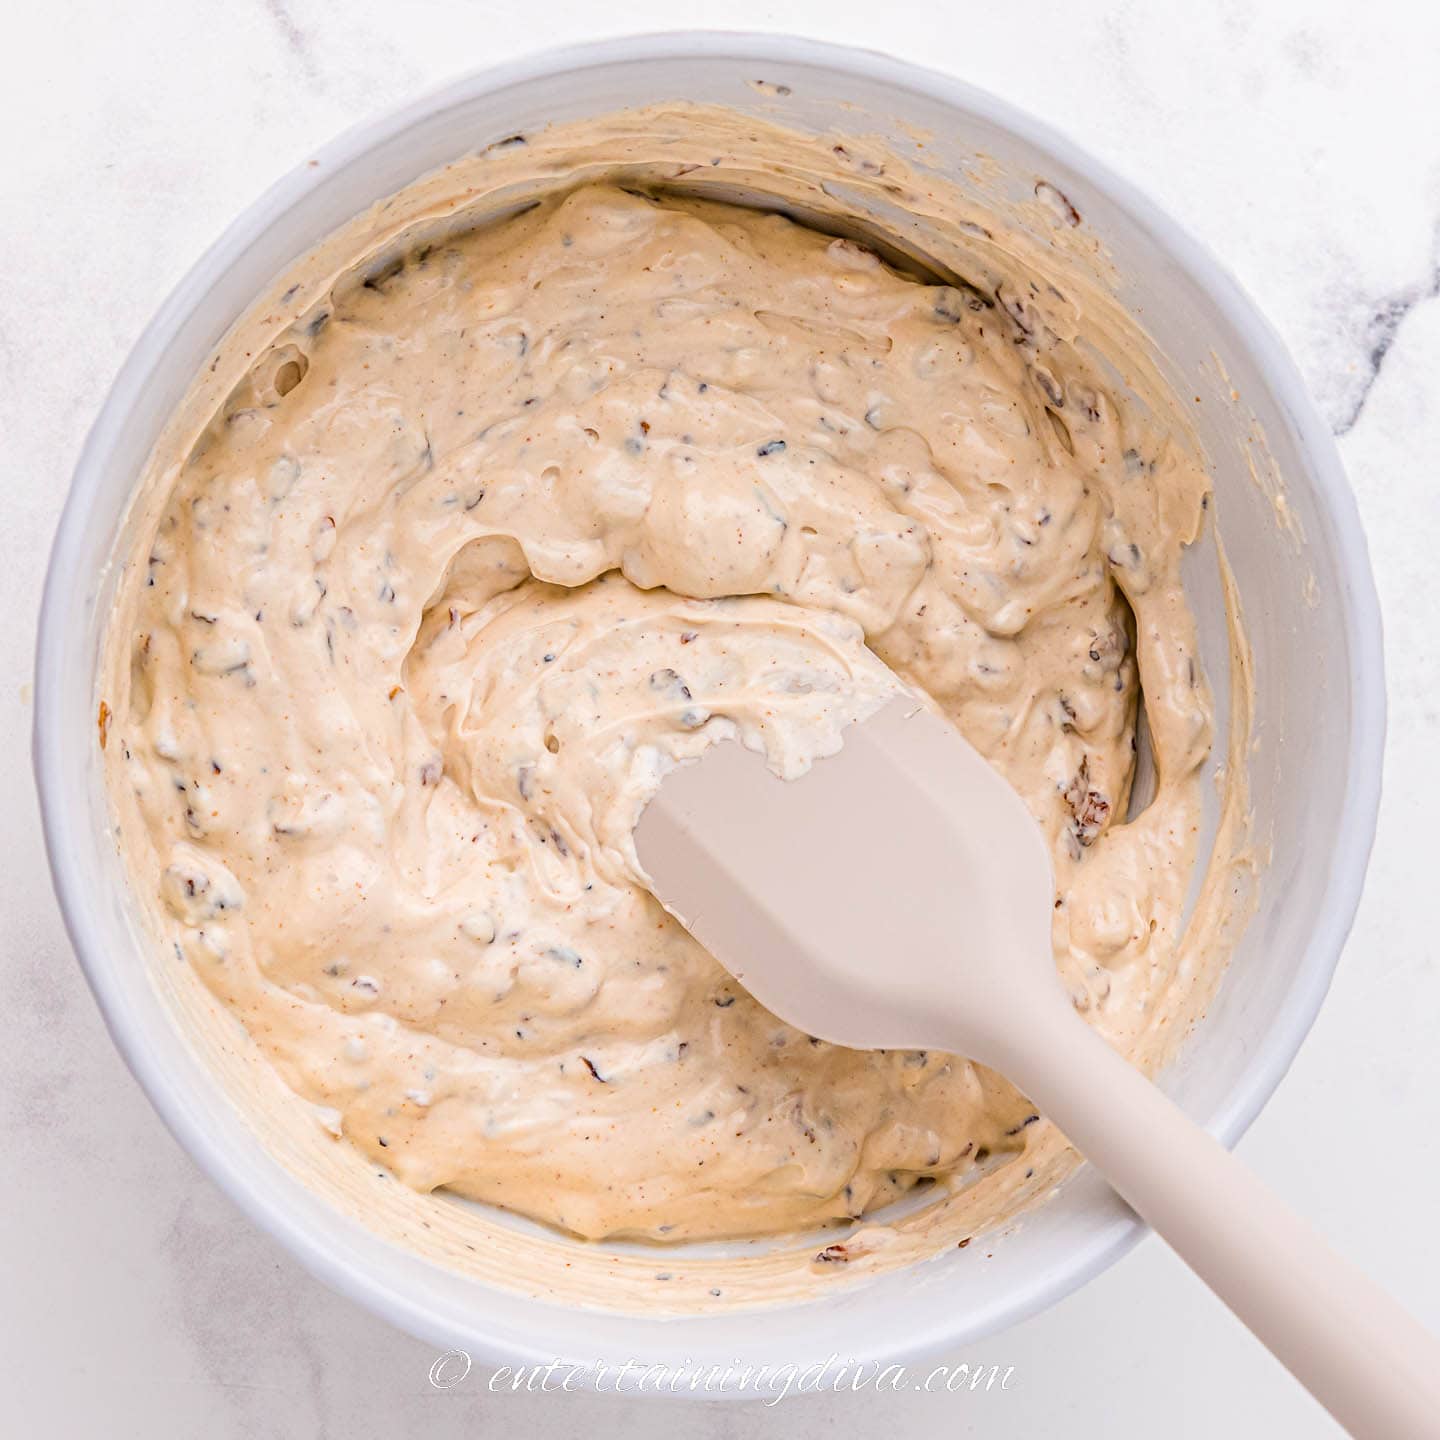 Mixed caramelized onion dip in a bowl with a spoon